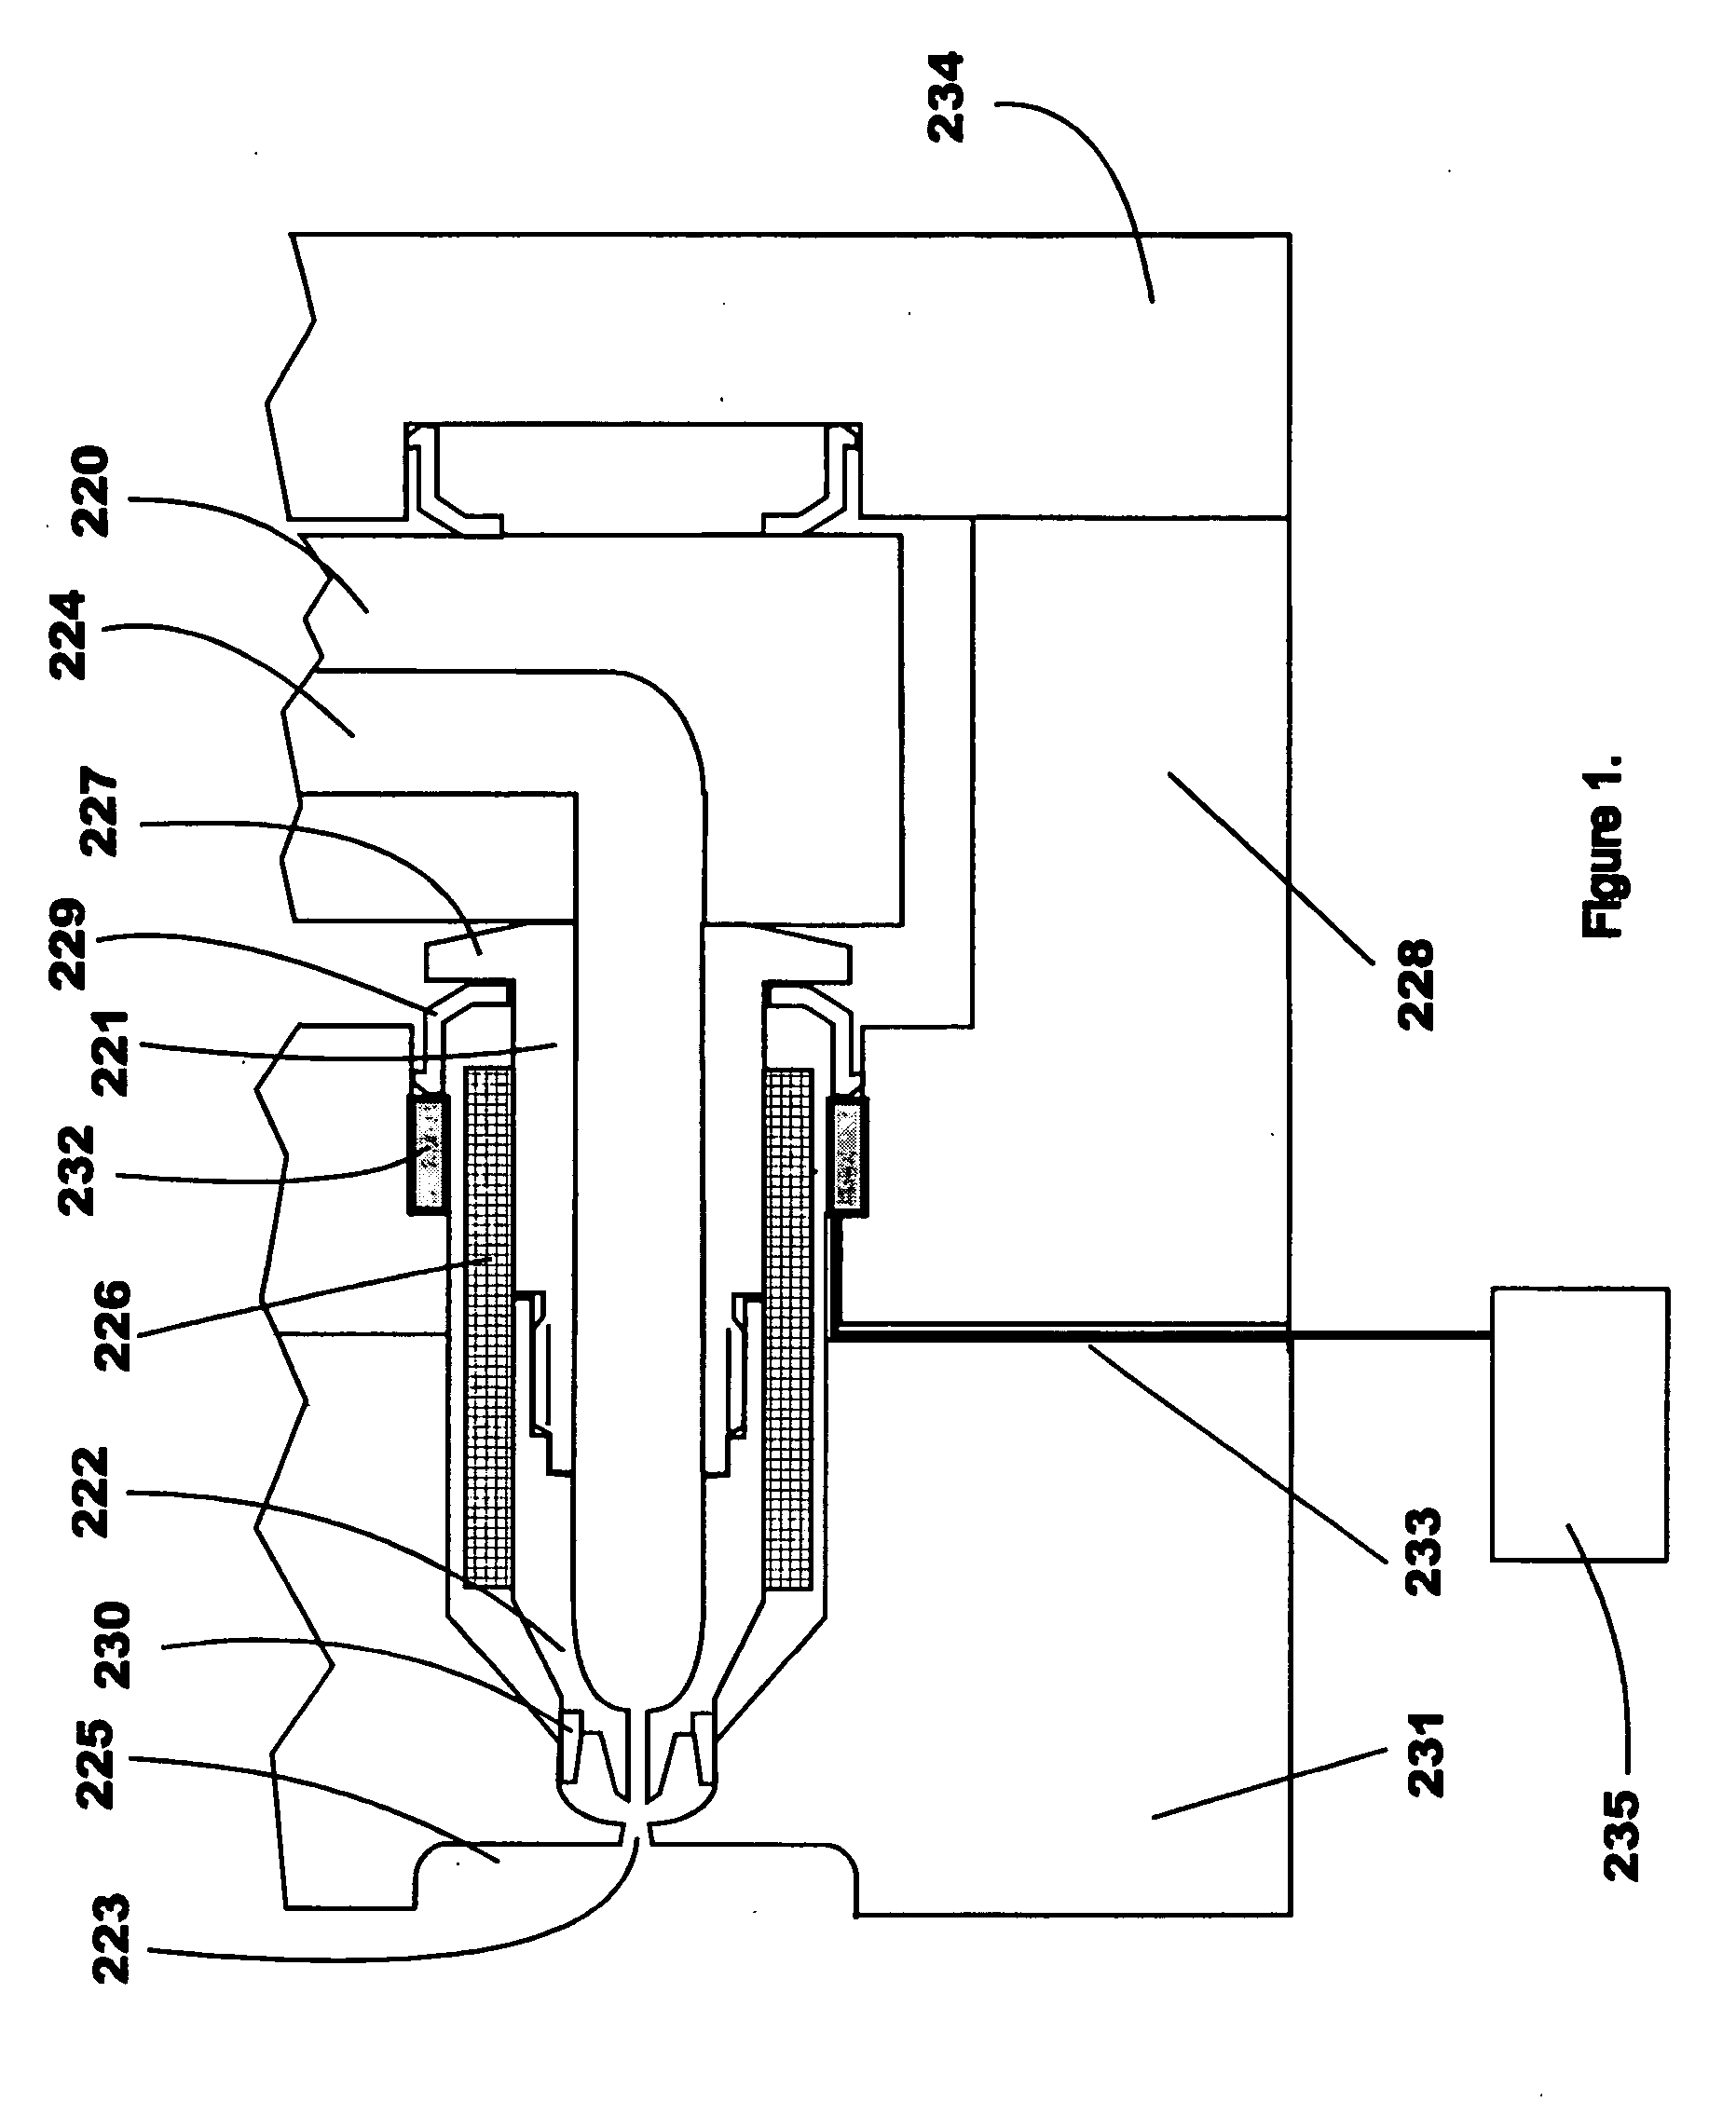 Method and apparatus for adjustable hot runner assembly seals and tip height using active material elements